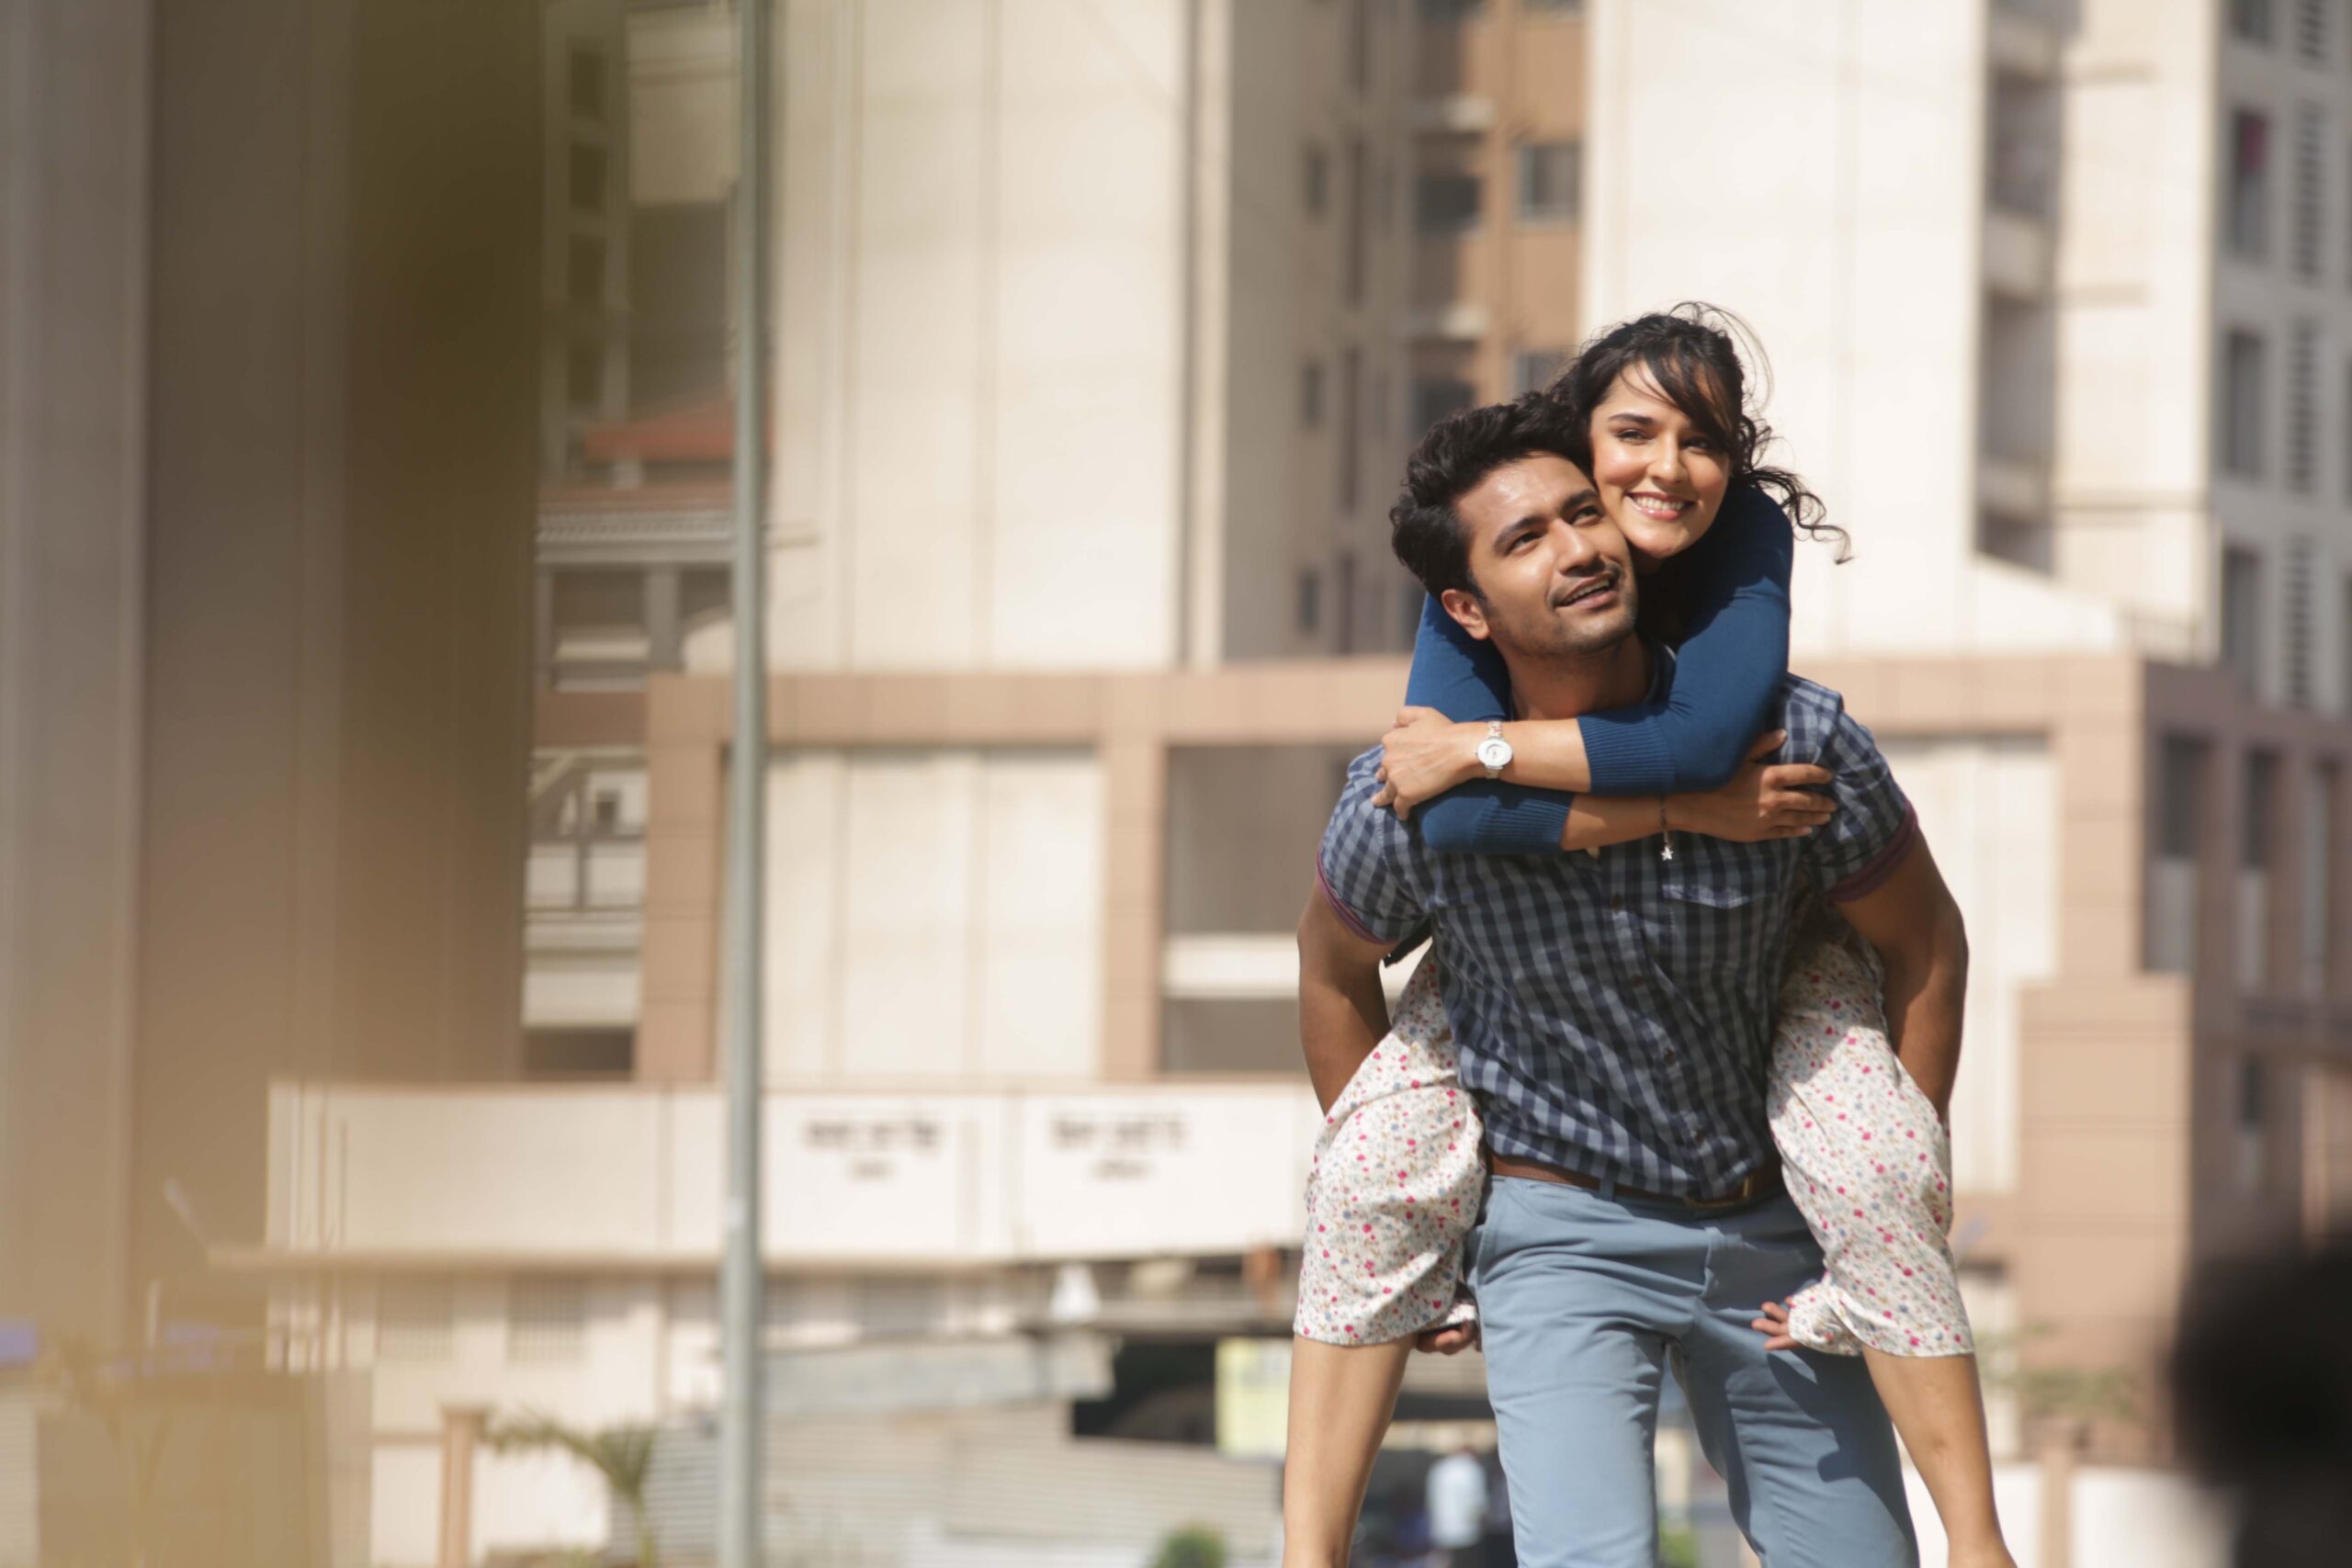 Vicky Kaushal and Angira Dhar in Love Per Square Foot